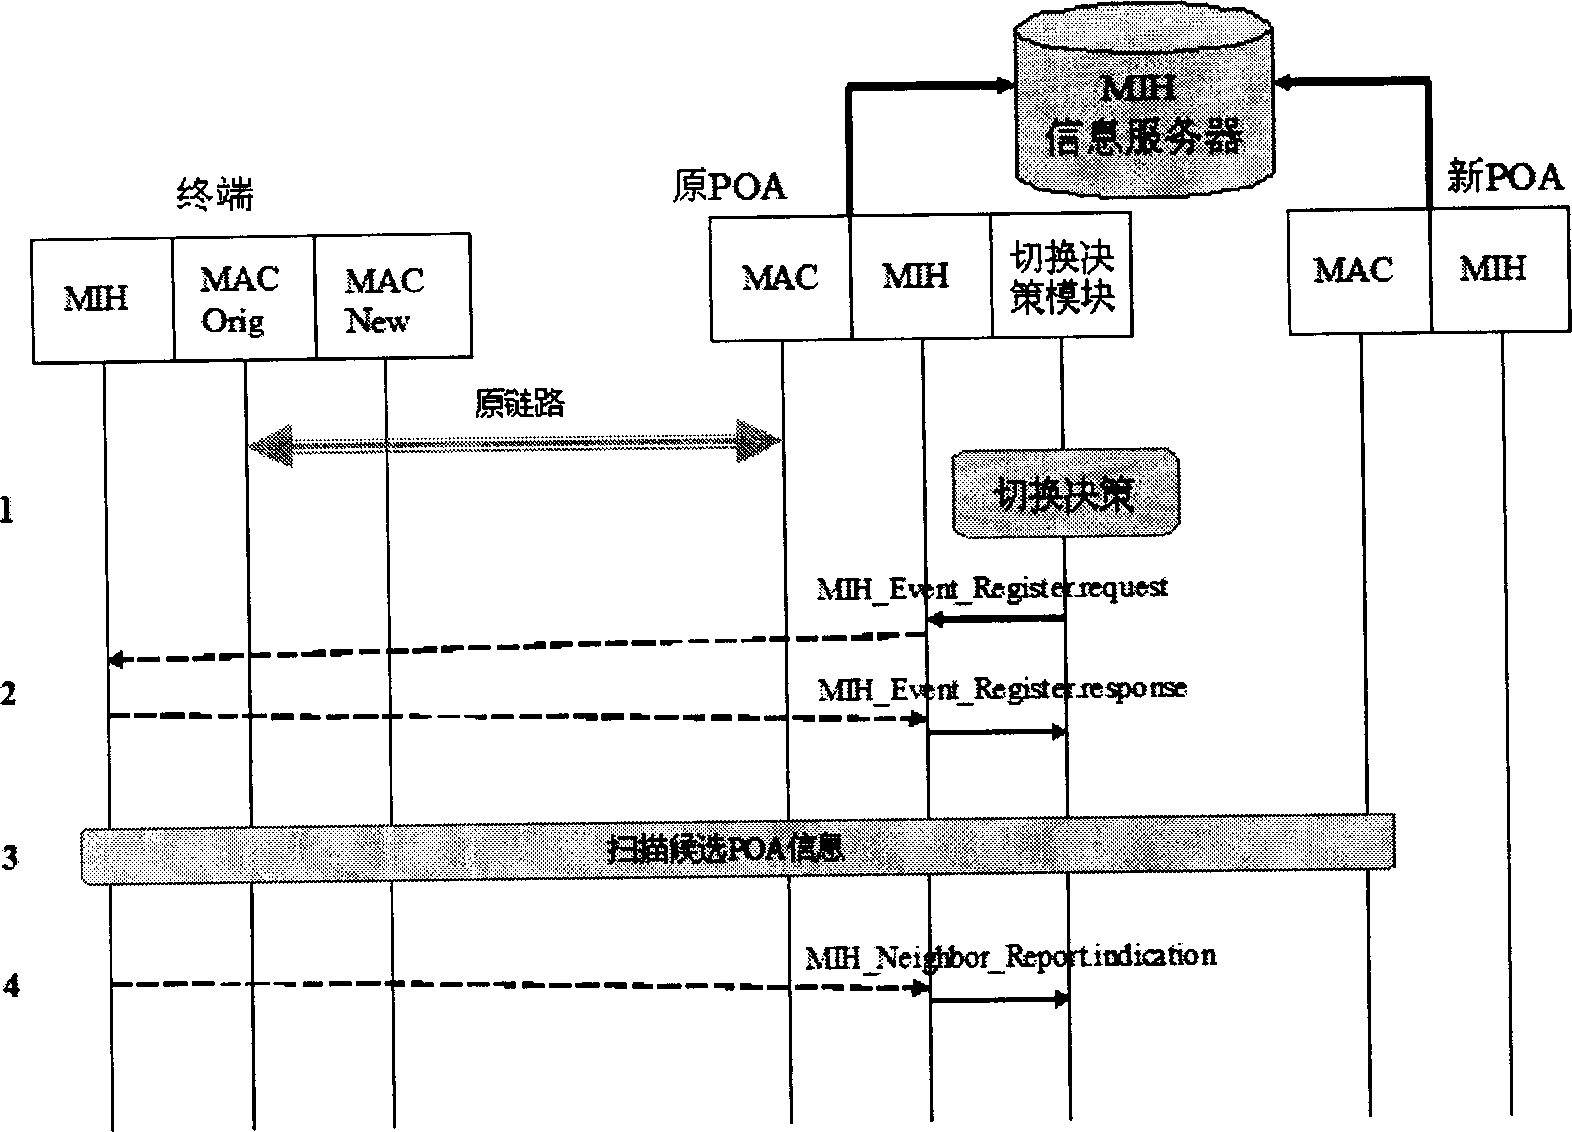 Wireless-network environment detection and reporting method in network switch-over